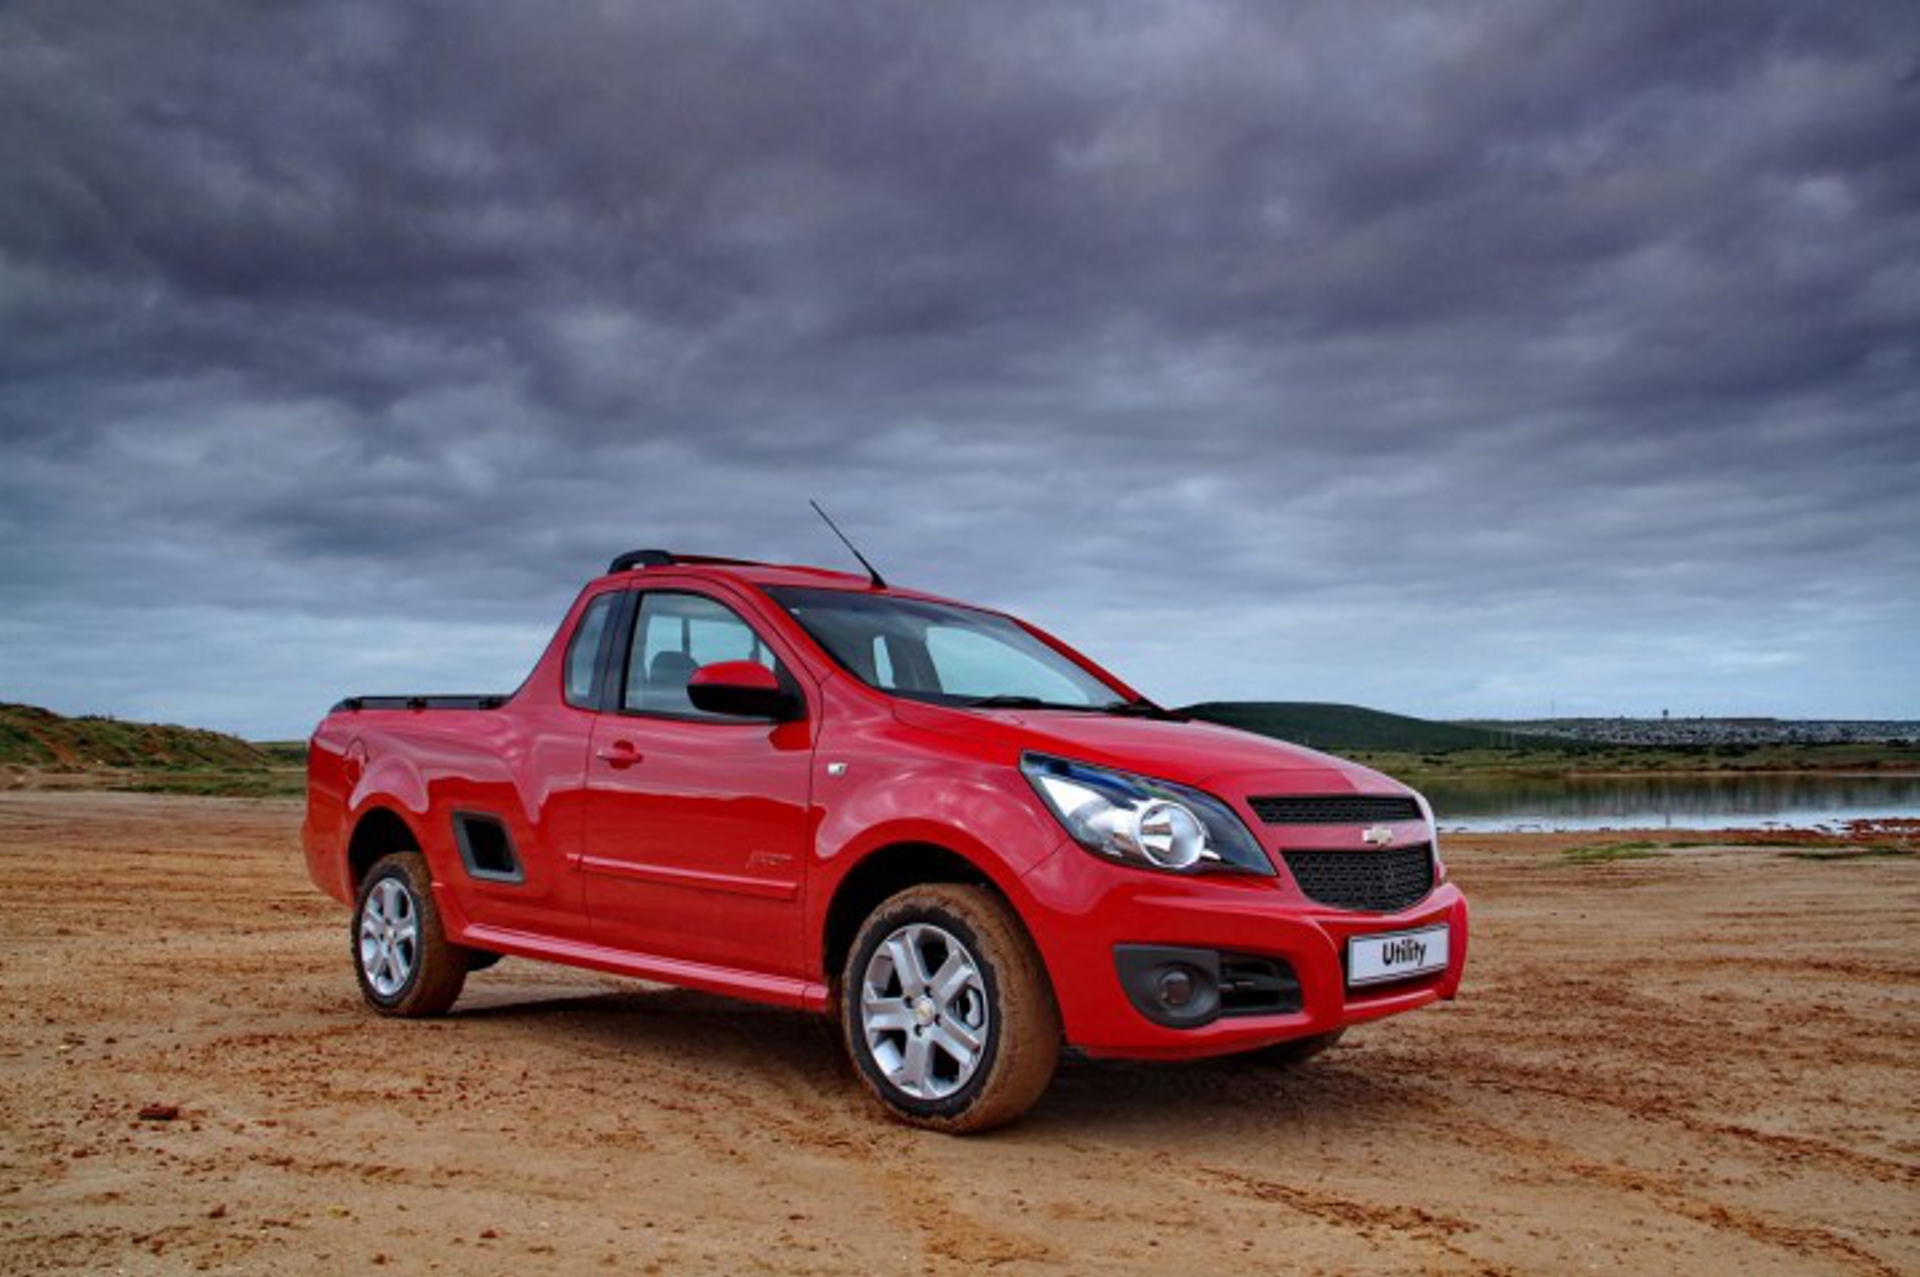 Chevrolet Utility: Diesel Power For Chevrolet Utility Range Plus Added Safety Specification For Base And Club Models